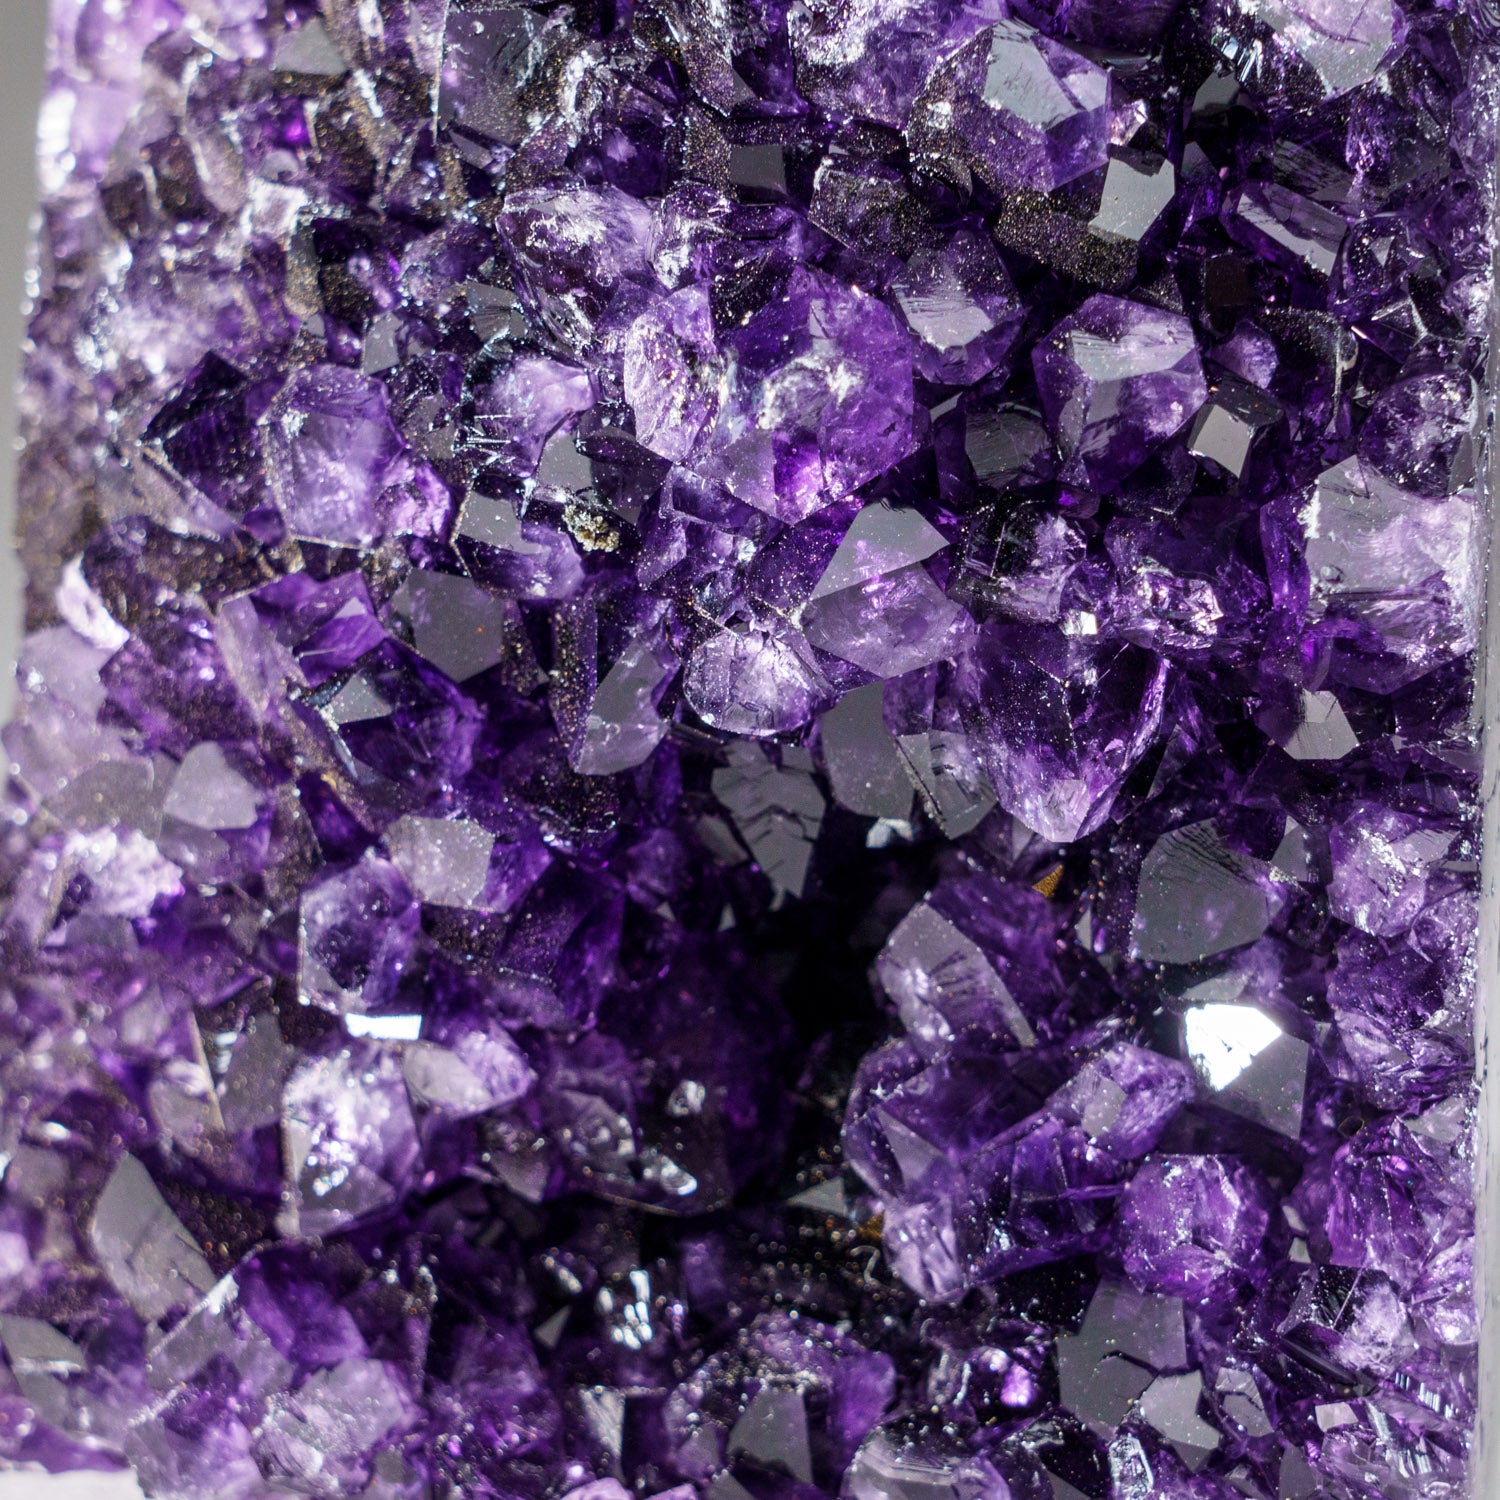 Genuine Amethyst Crystal Cluster from Brazil (2.6 lbs)